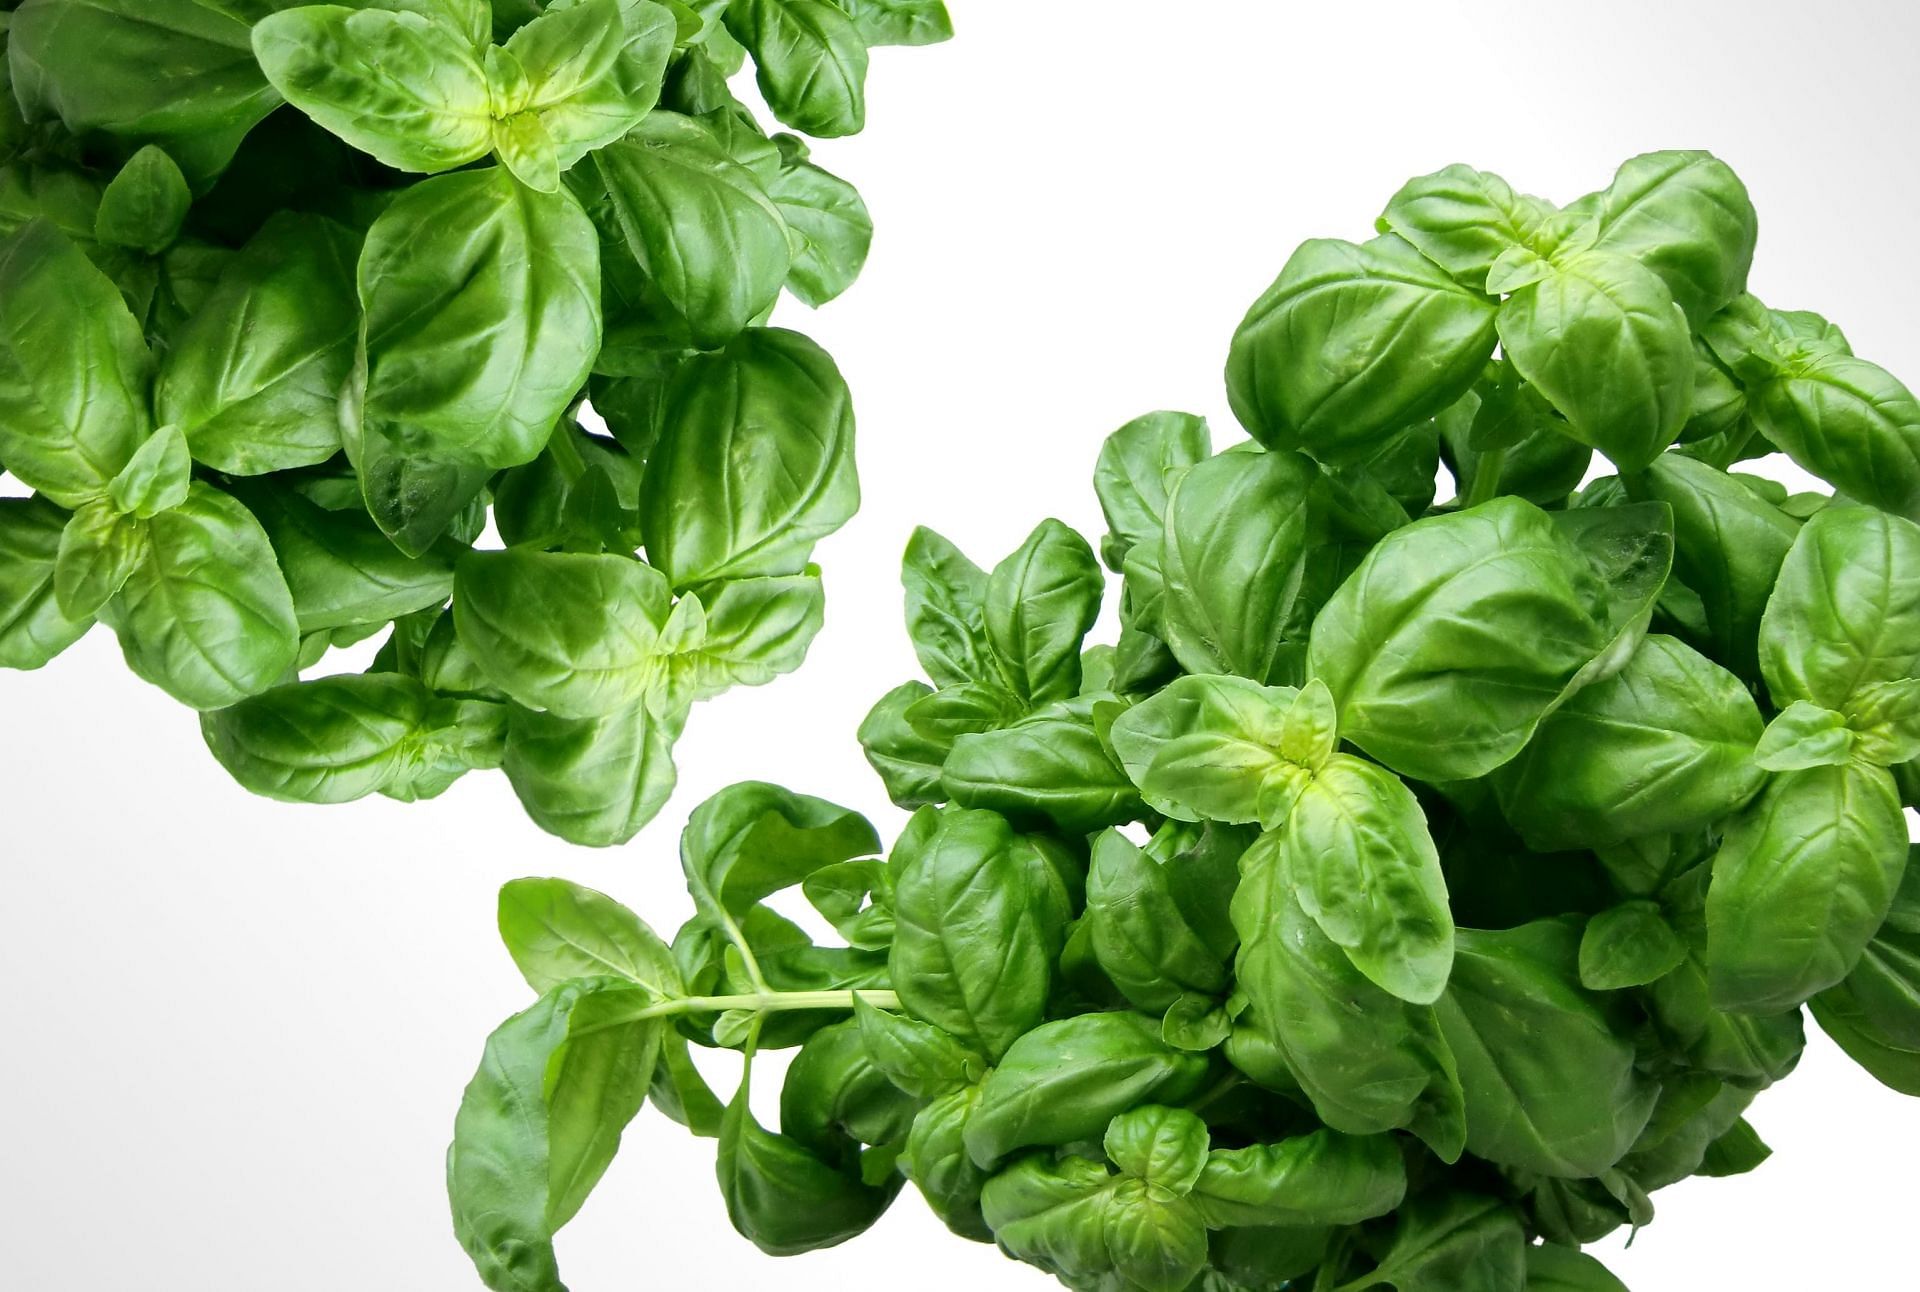 basil essential oil benefits (image sourced via Pexels / Photo by pixabay)